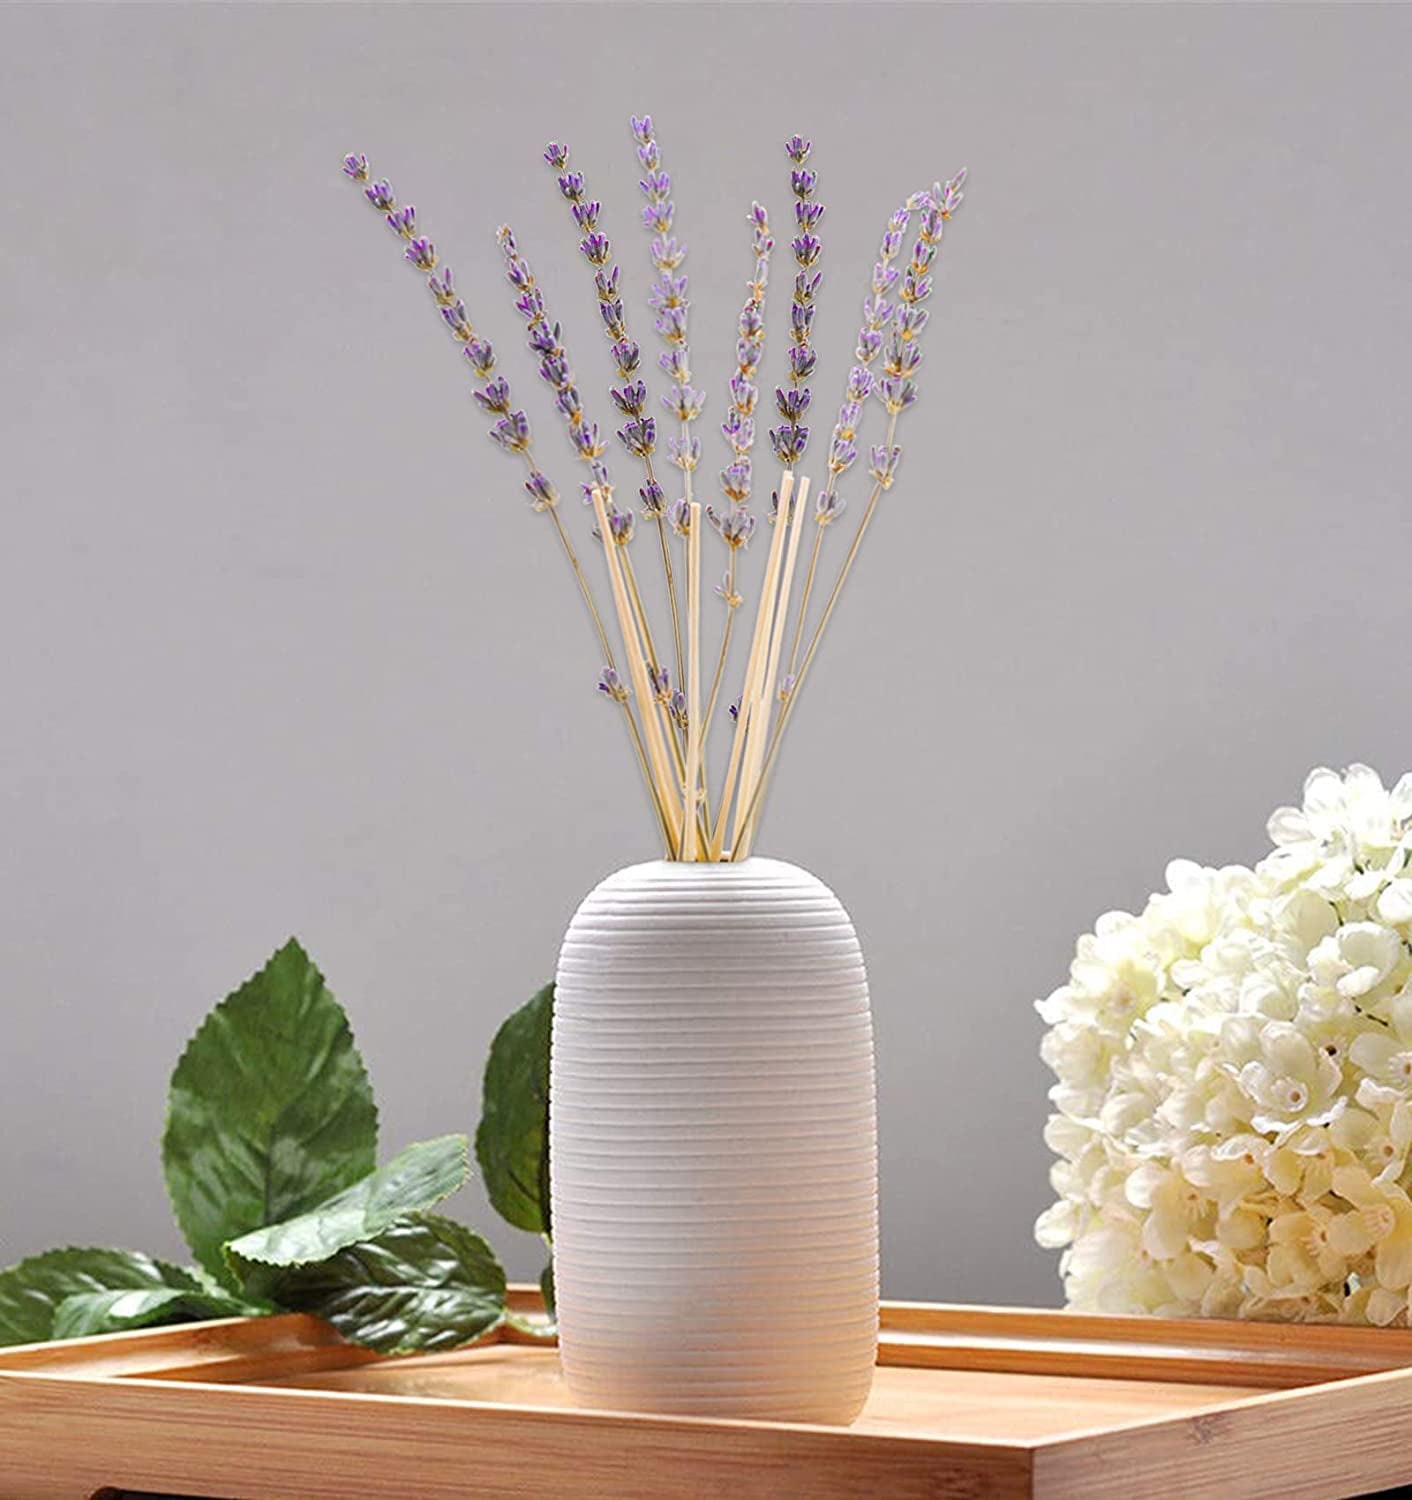 Reed Diffuser, Reed Diffuser Set, Oil Diffuser & Reed Diffuser Sticks, Lavender Reed Diffuser for Bathroom, Preserved Real Flower Stress Relief Sandalwood Diffuser with Incense Sticks